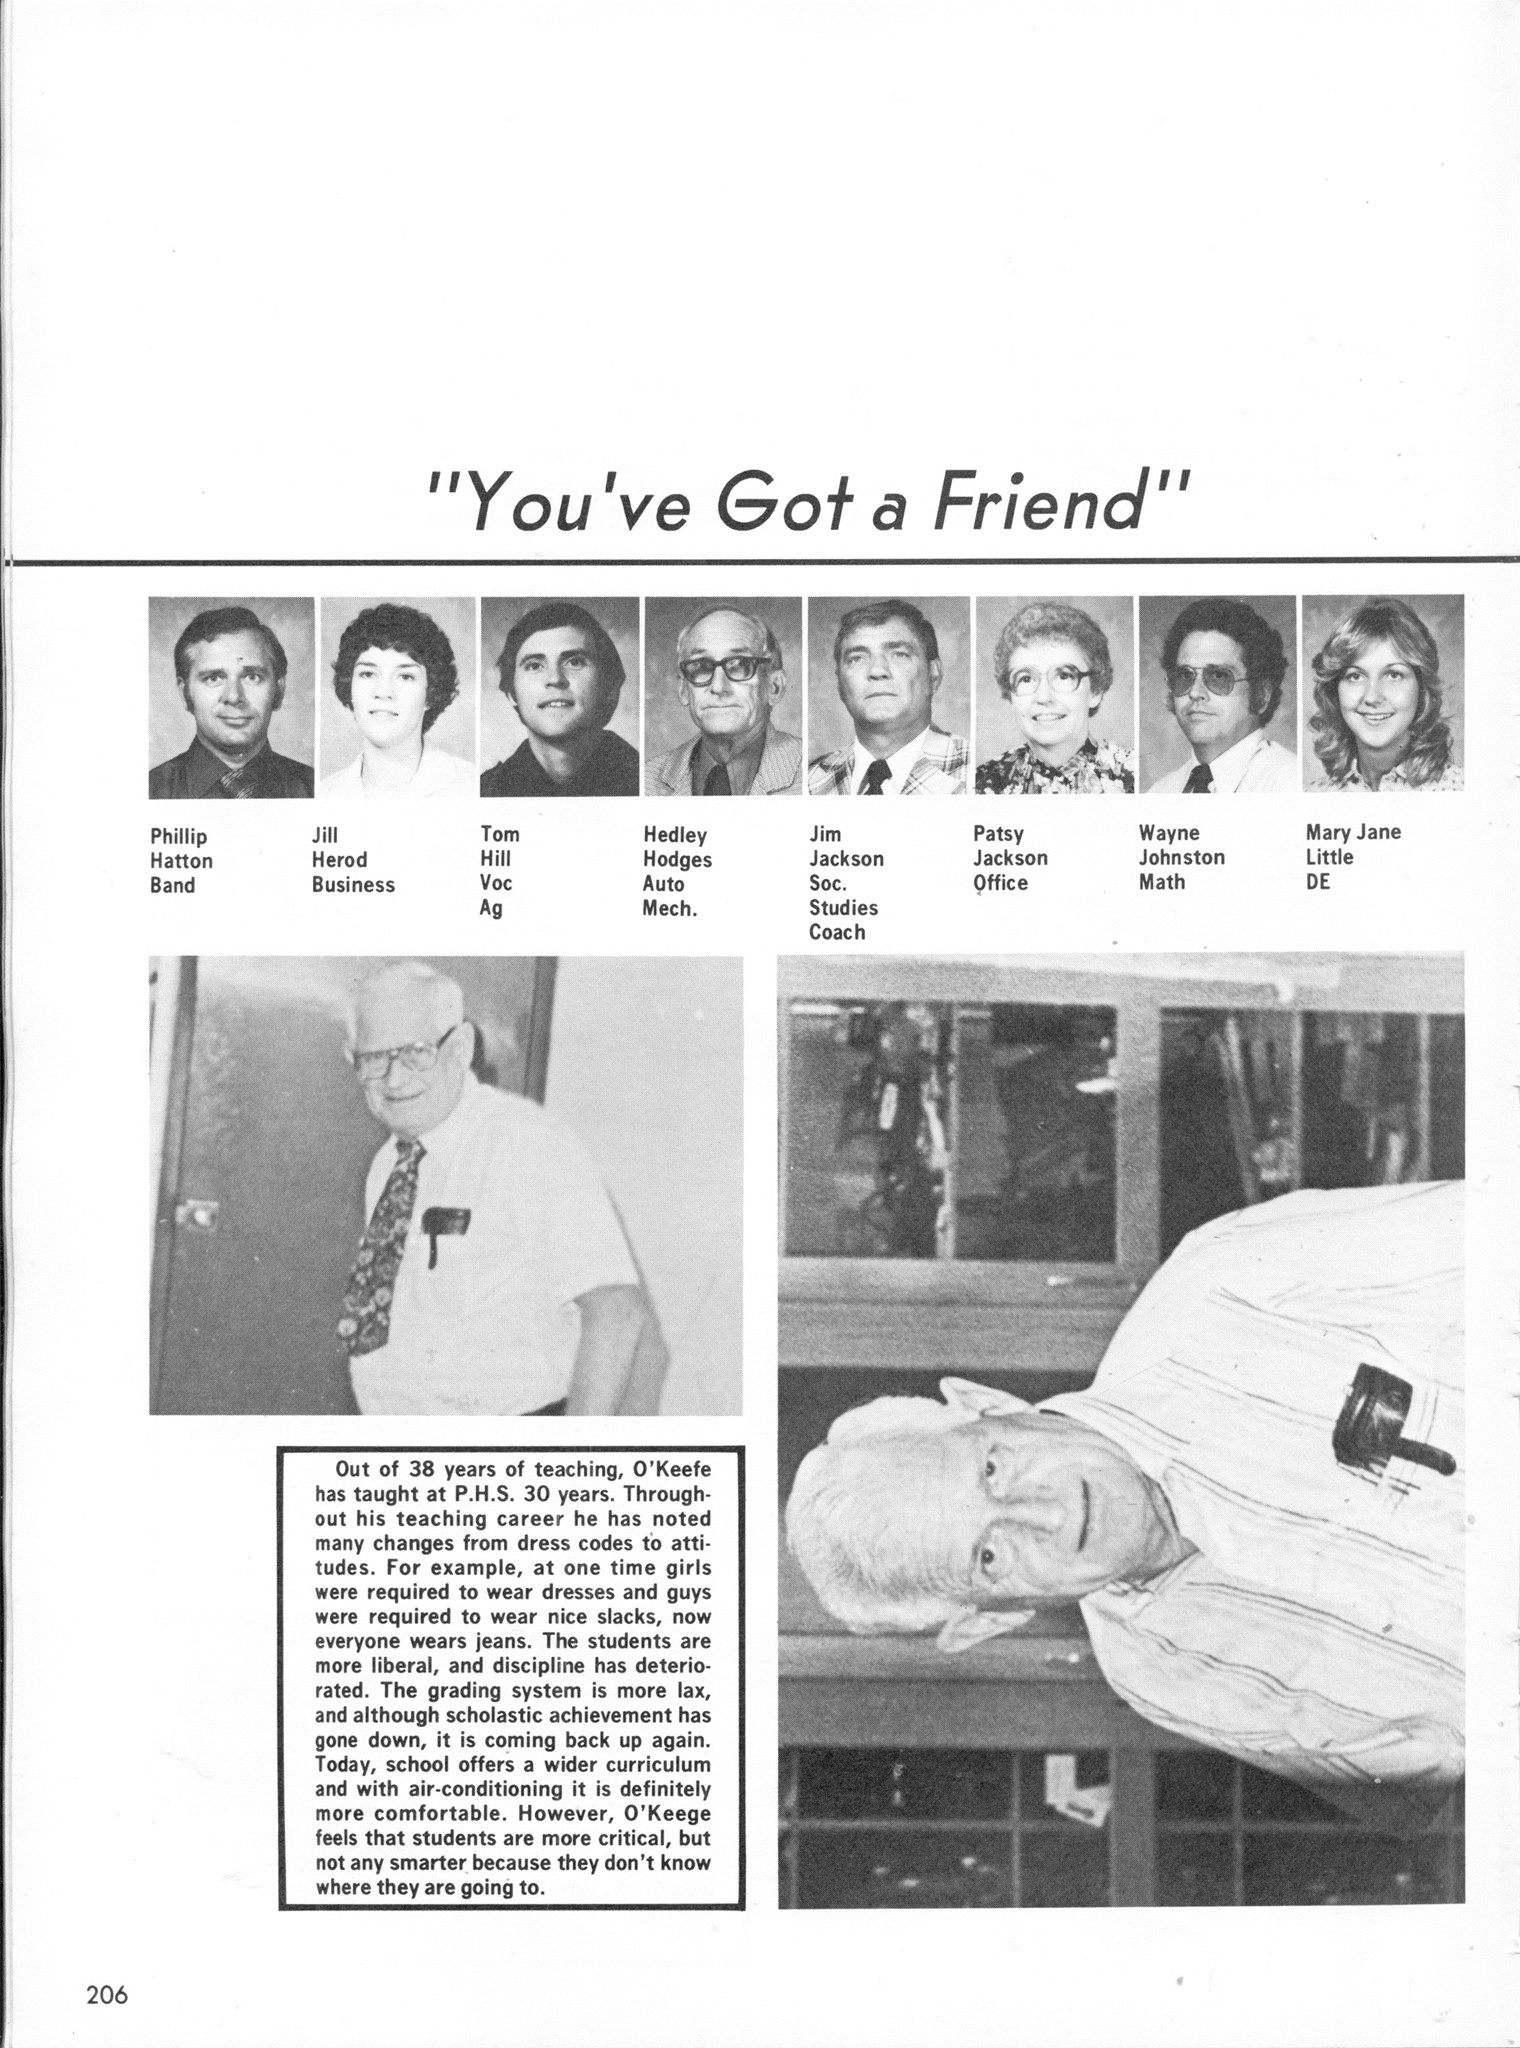 ../../../Images/Large/1980/Arclight-1980-pg0206.jpg